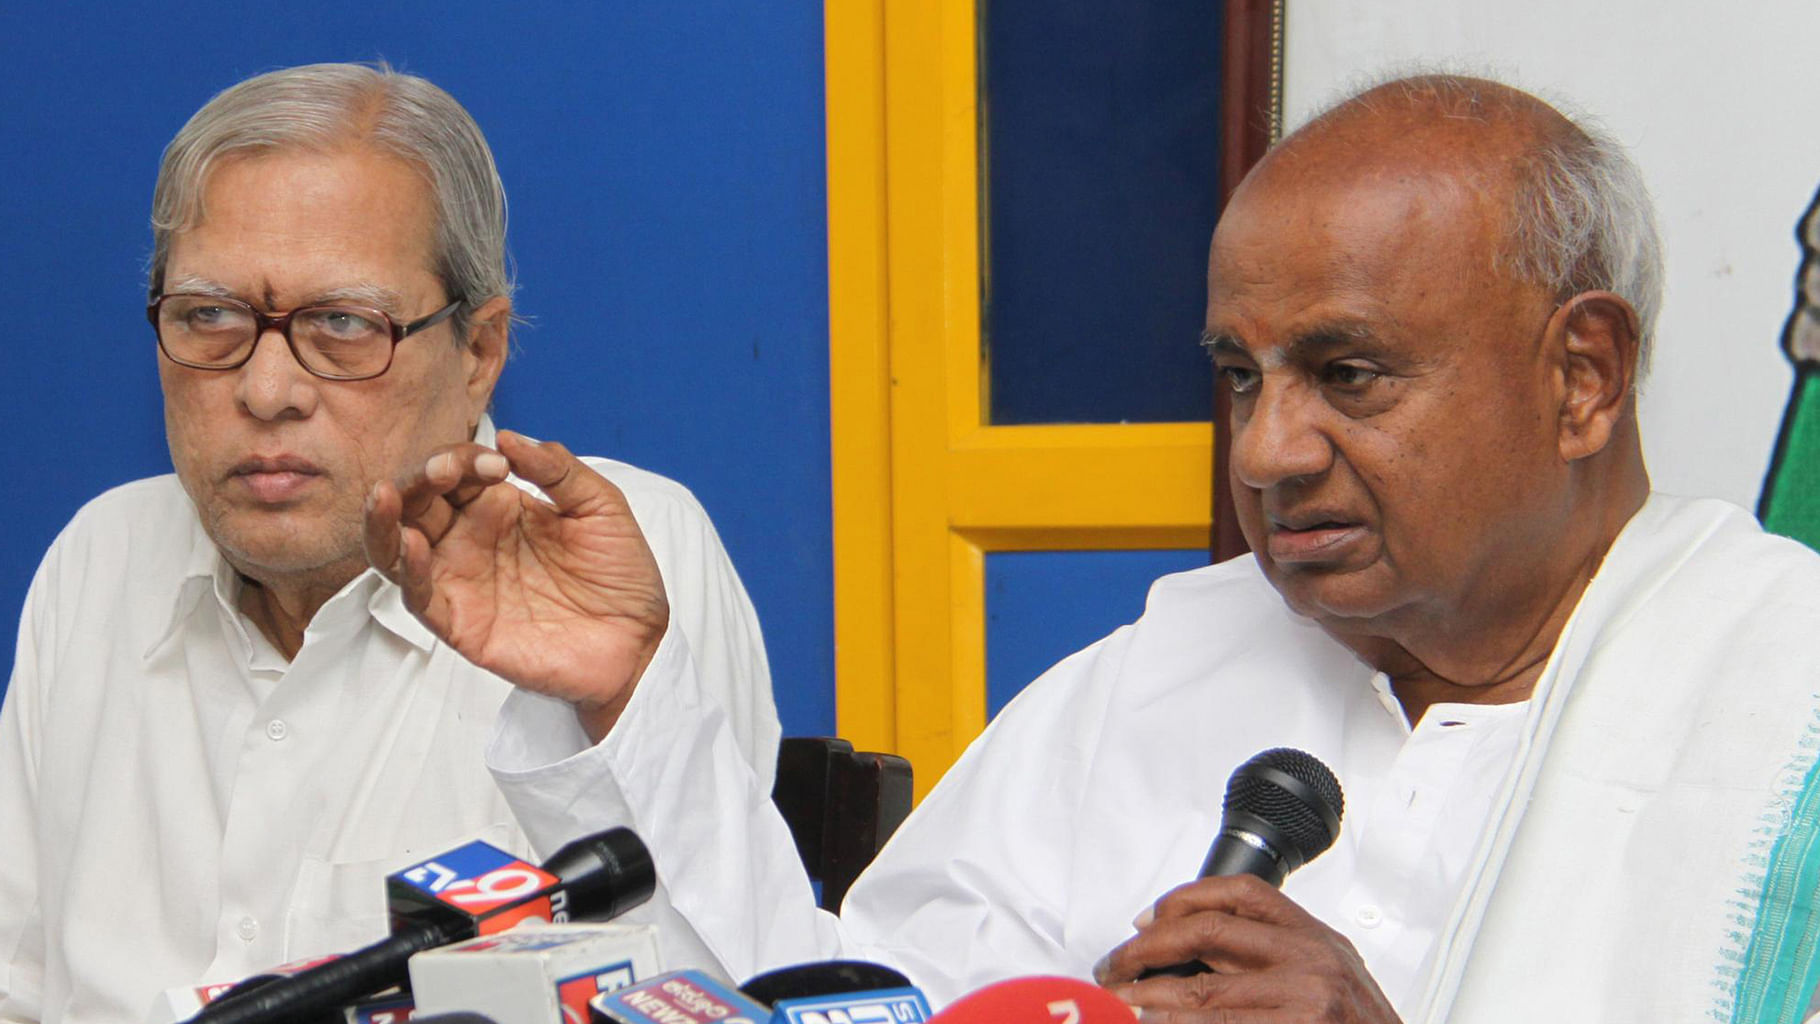 Former Prime Minister HD Deve Gowda addresses a press conference in Bengaluru on 25 July 2015. (Photo: IANS)